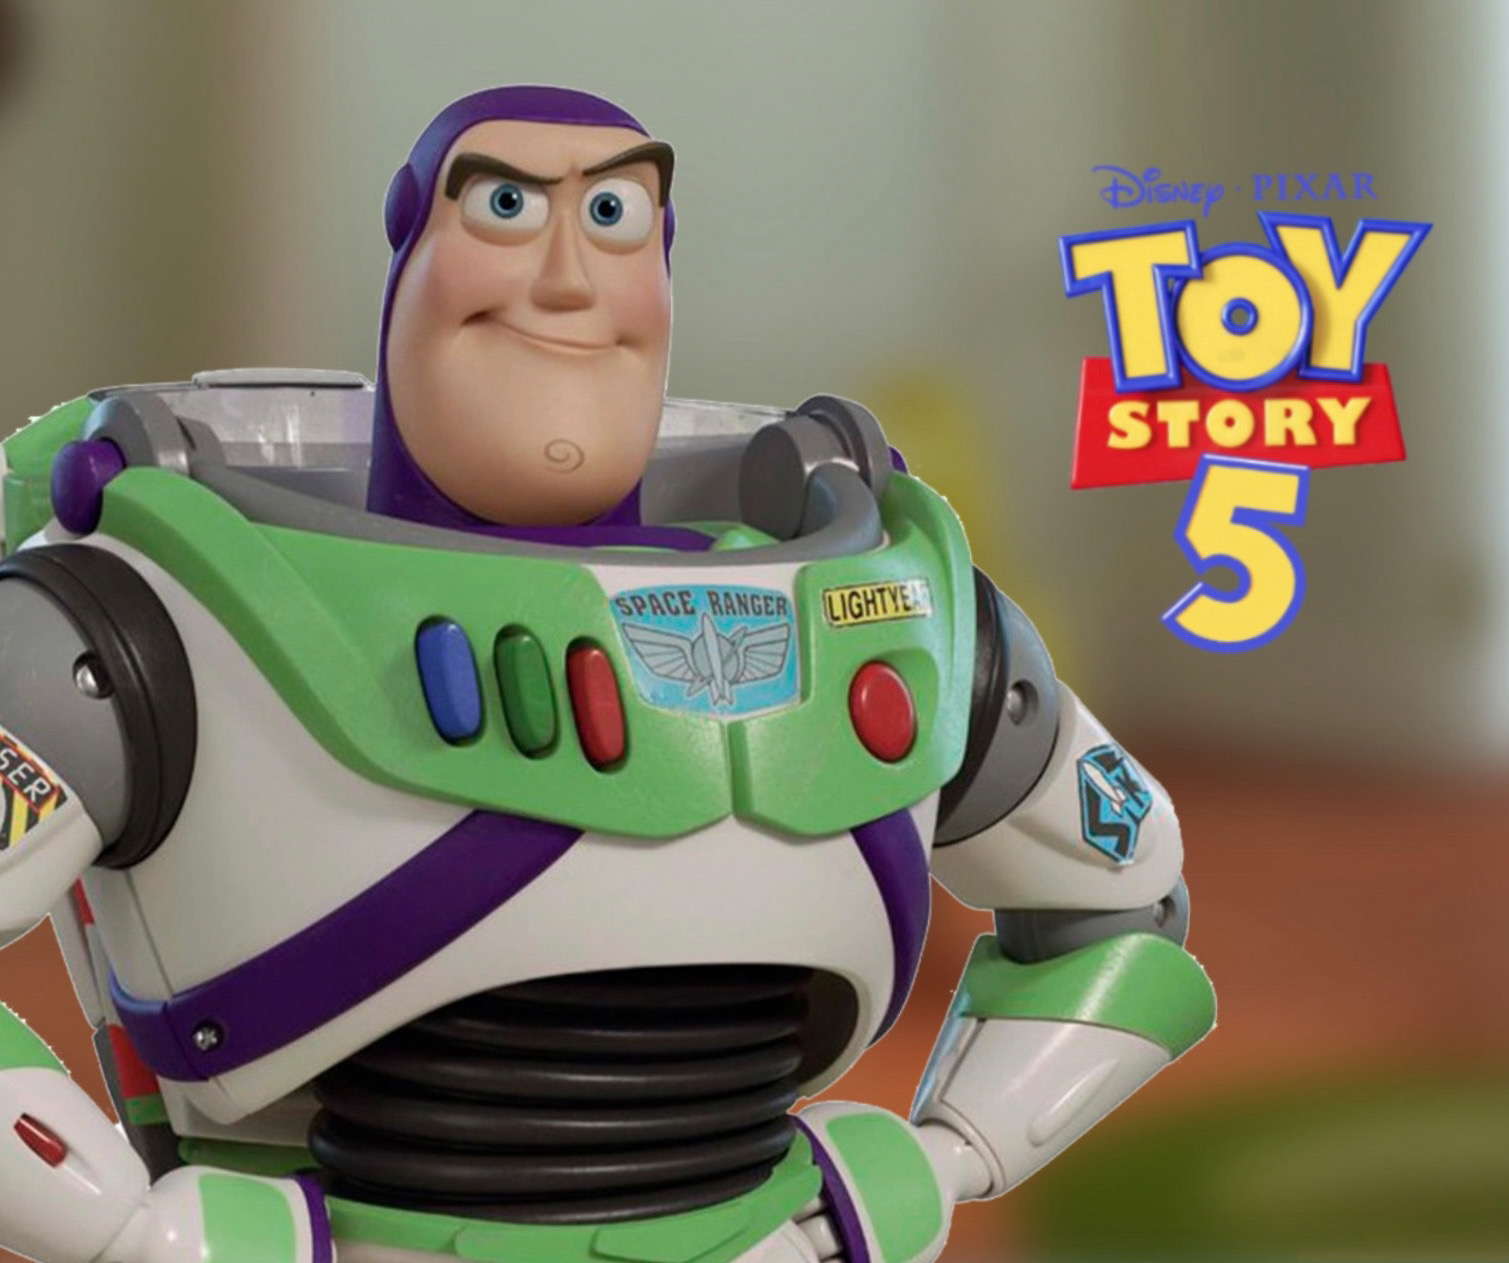 Toy Story 5: All You Need To Know, by ⭐ Thomas D.